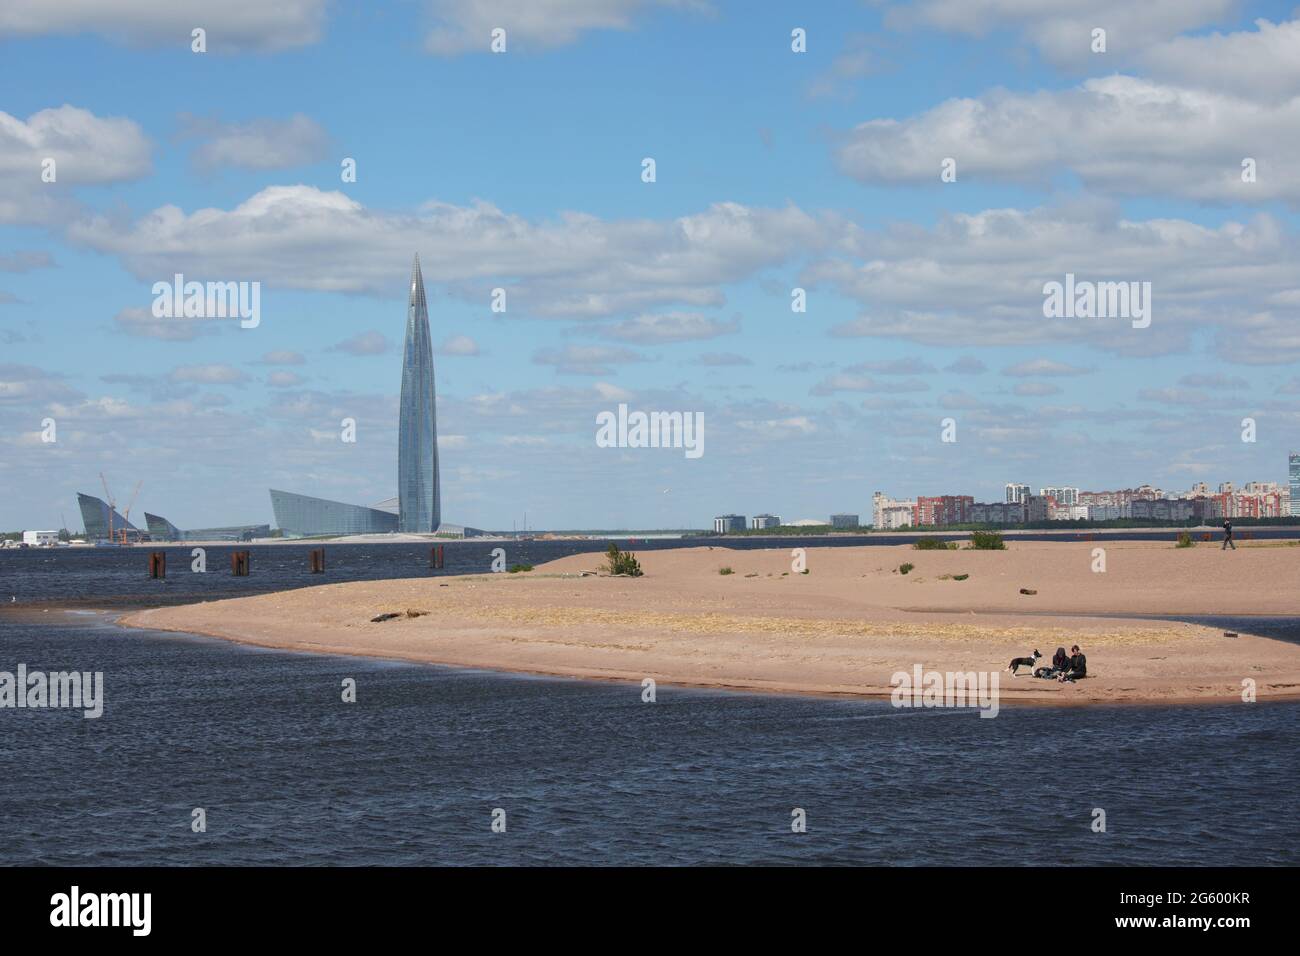 St. Petersburg, Russia, 31th May, 2020: Gazprom Tower dominating over the cityscape viewed from the estuary of Smolenka river Stock Photo